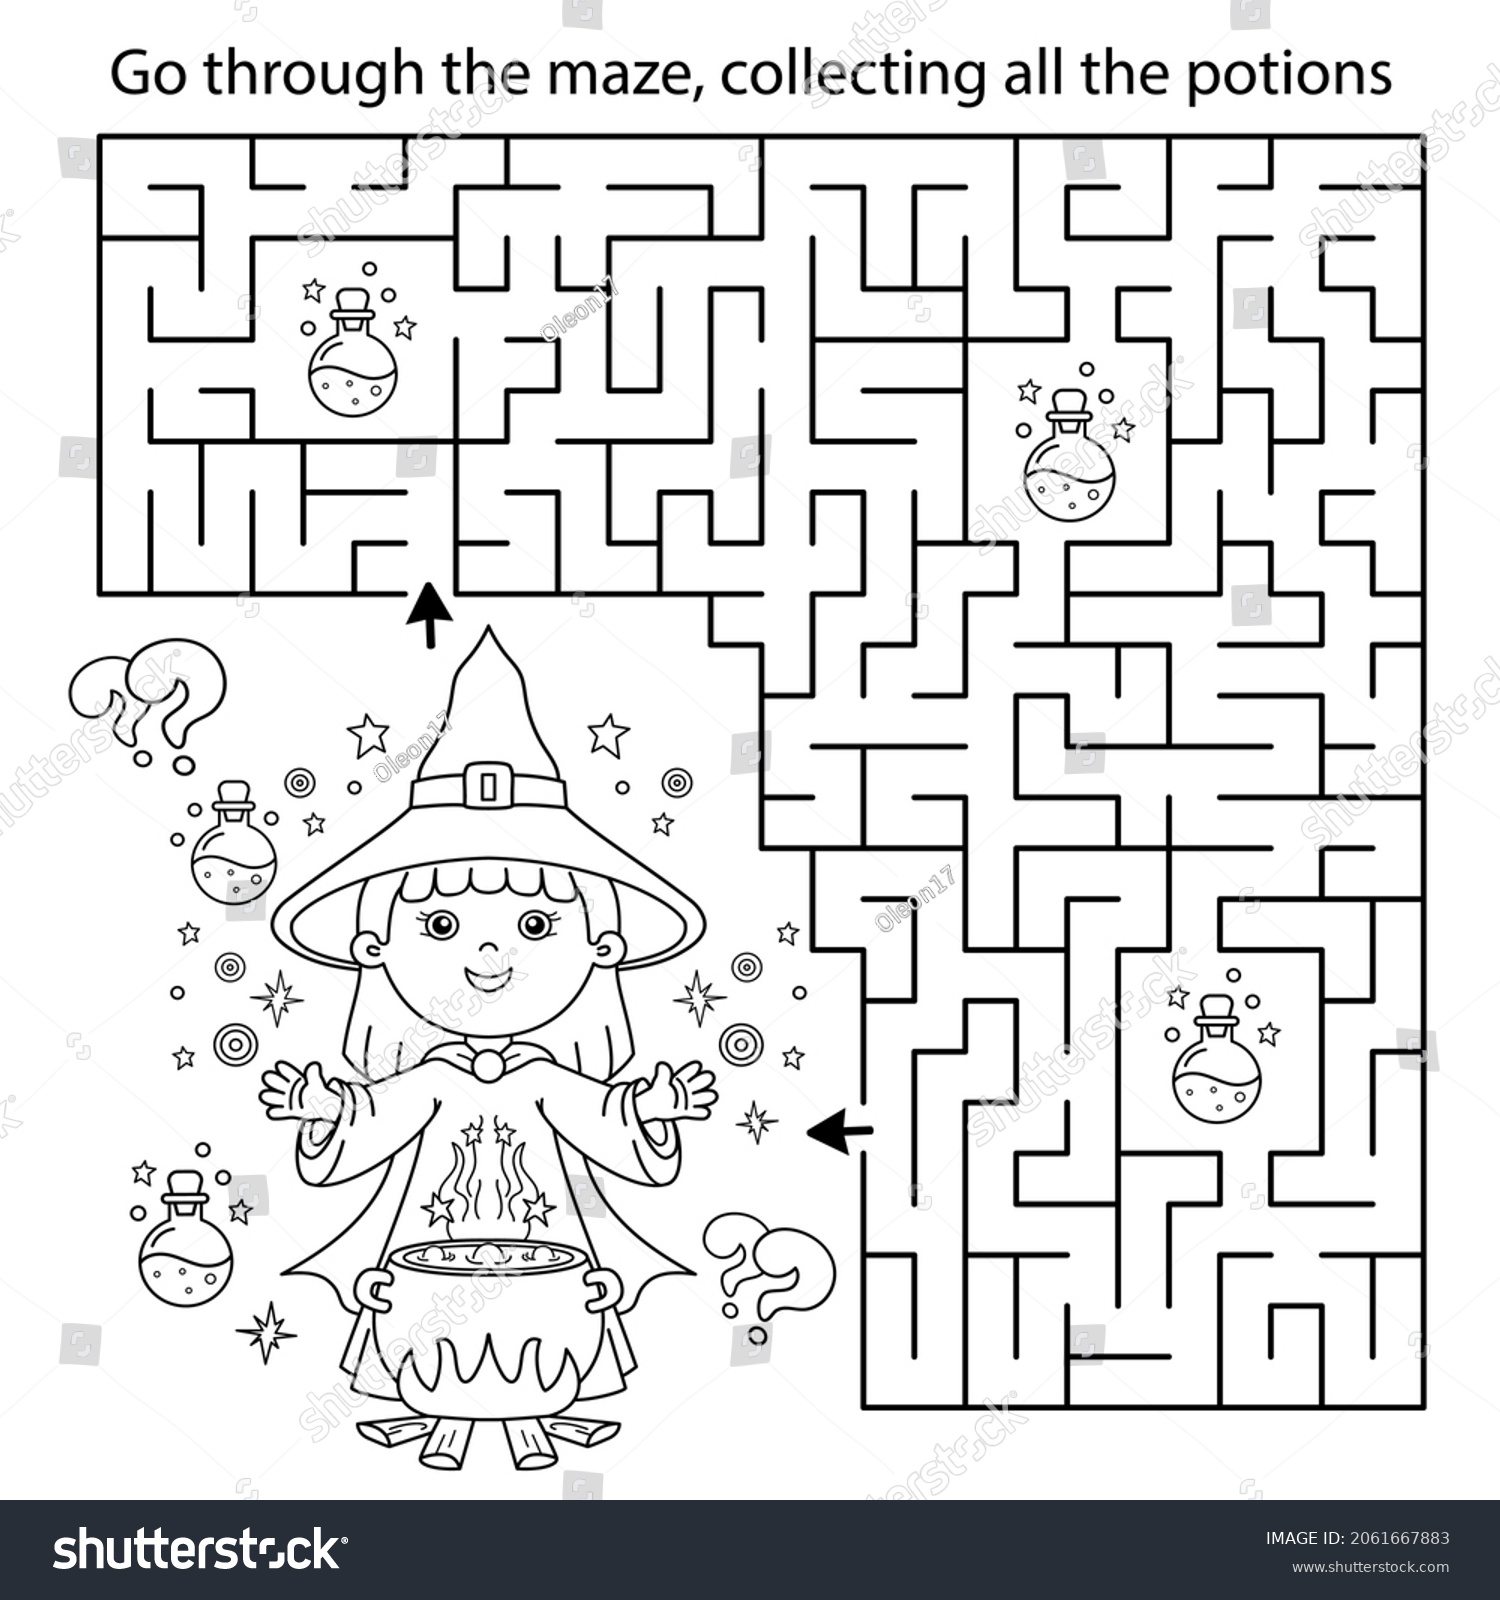 Maze Labyrinth Game Puzzle Coloring Page Stock Vector (Royalty Free ...